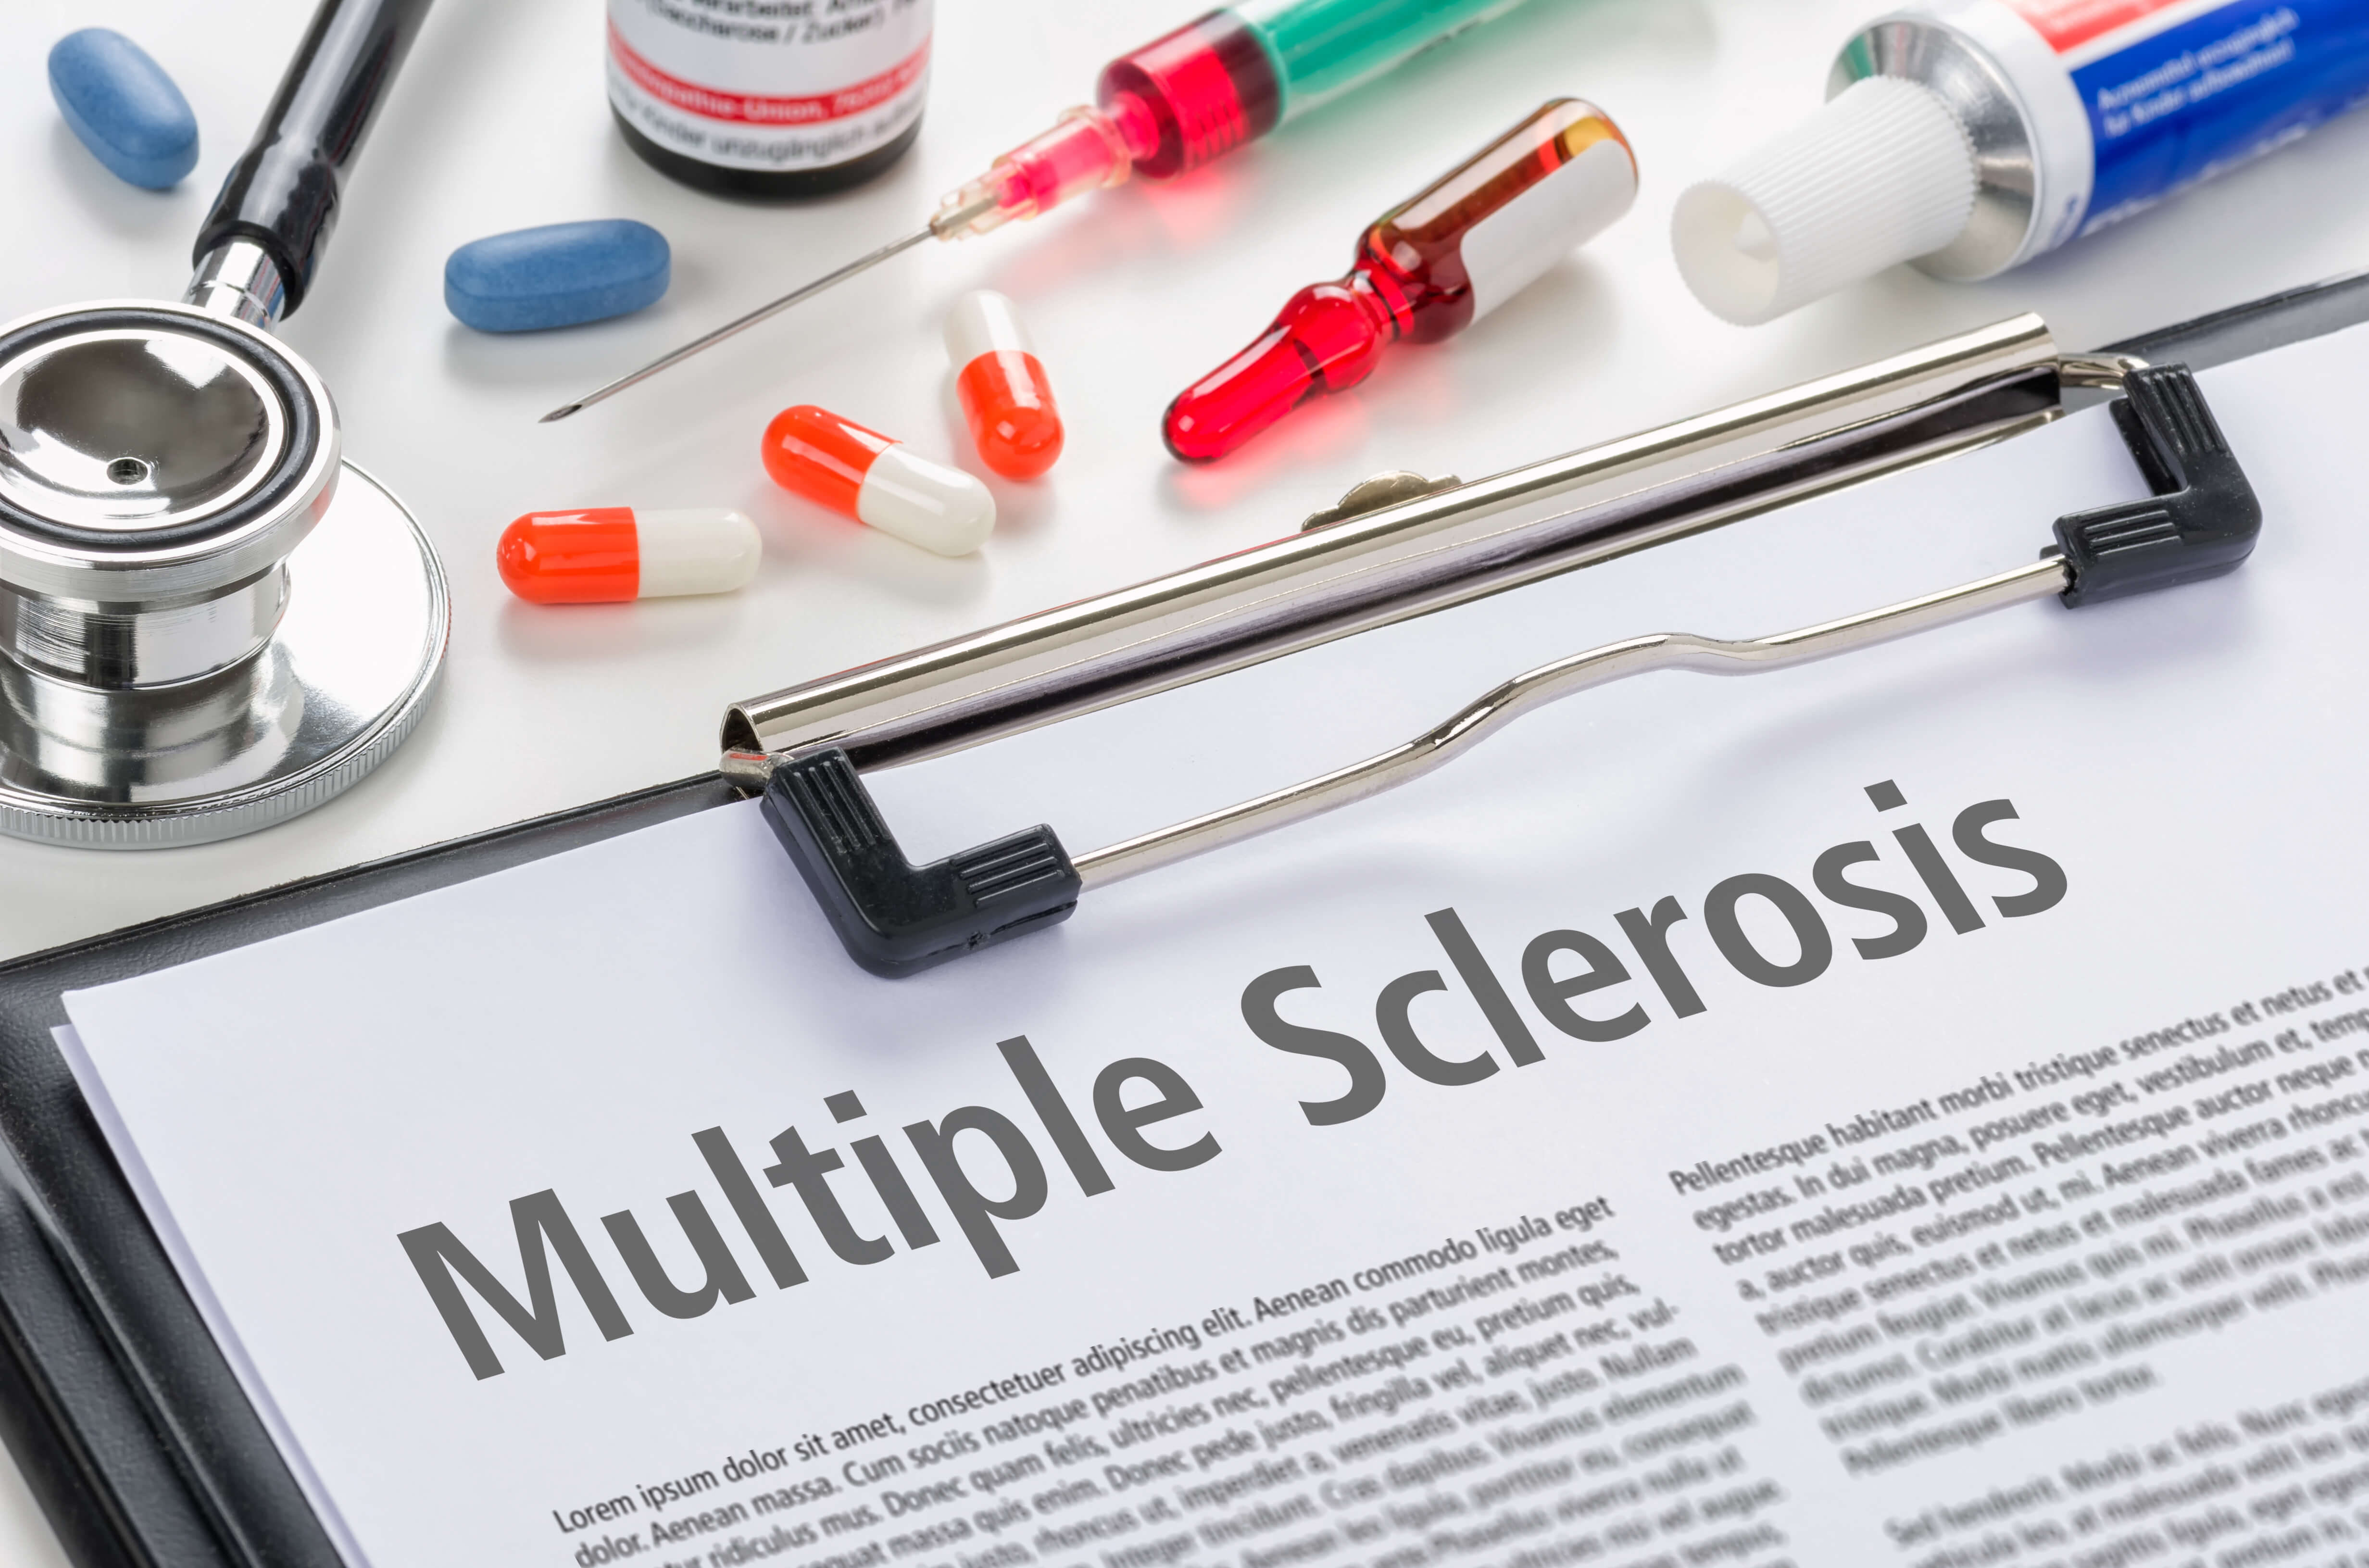 Multiple Sclerosis and stem cells